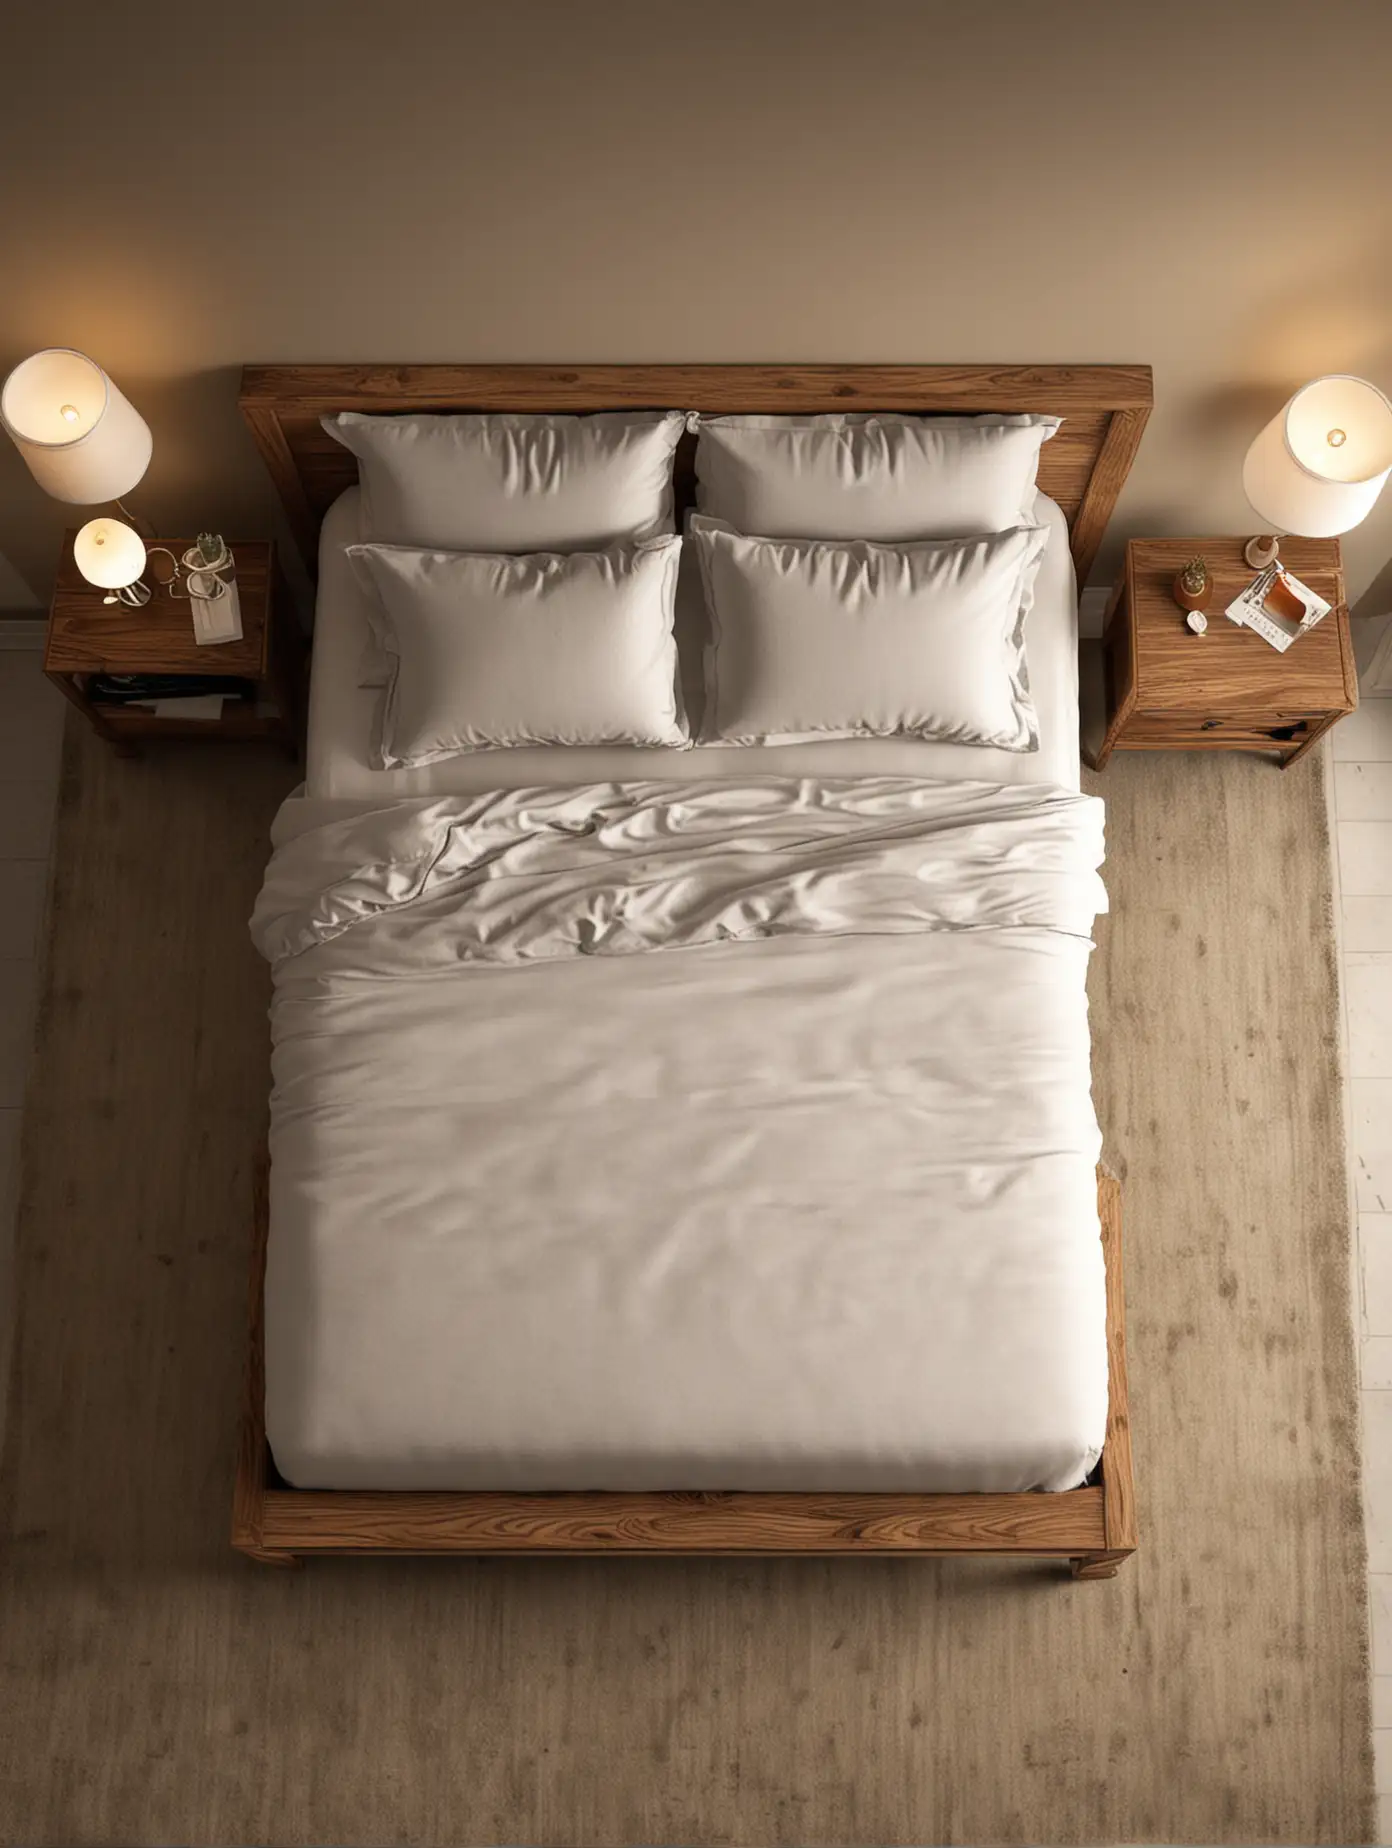 I want a mockup photo for a Bed . I want to show the bed from the celiling looking straight down at the bed. California king size Bed NO BEDDING . a lamp and nightstand beside the bed.